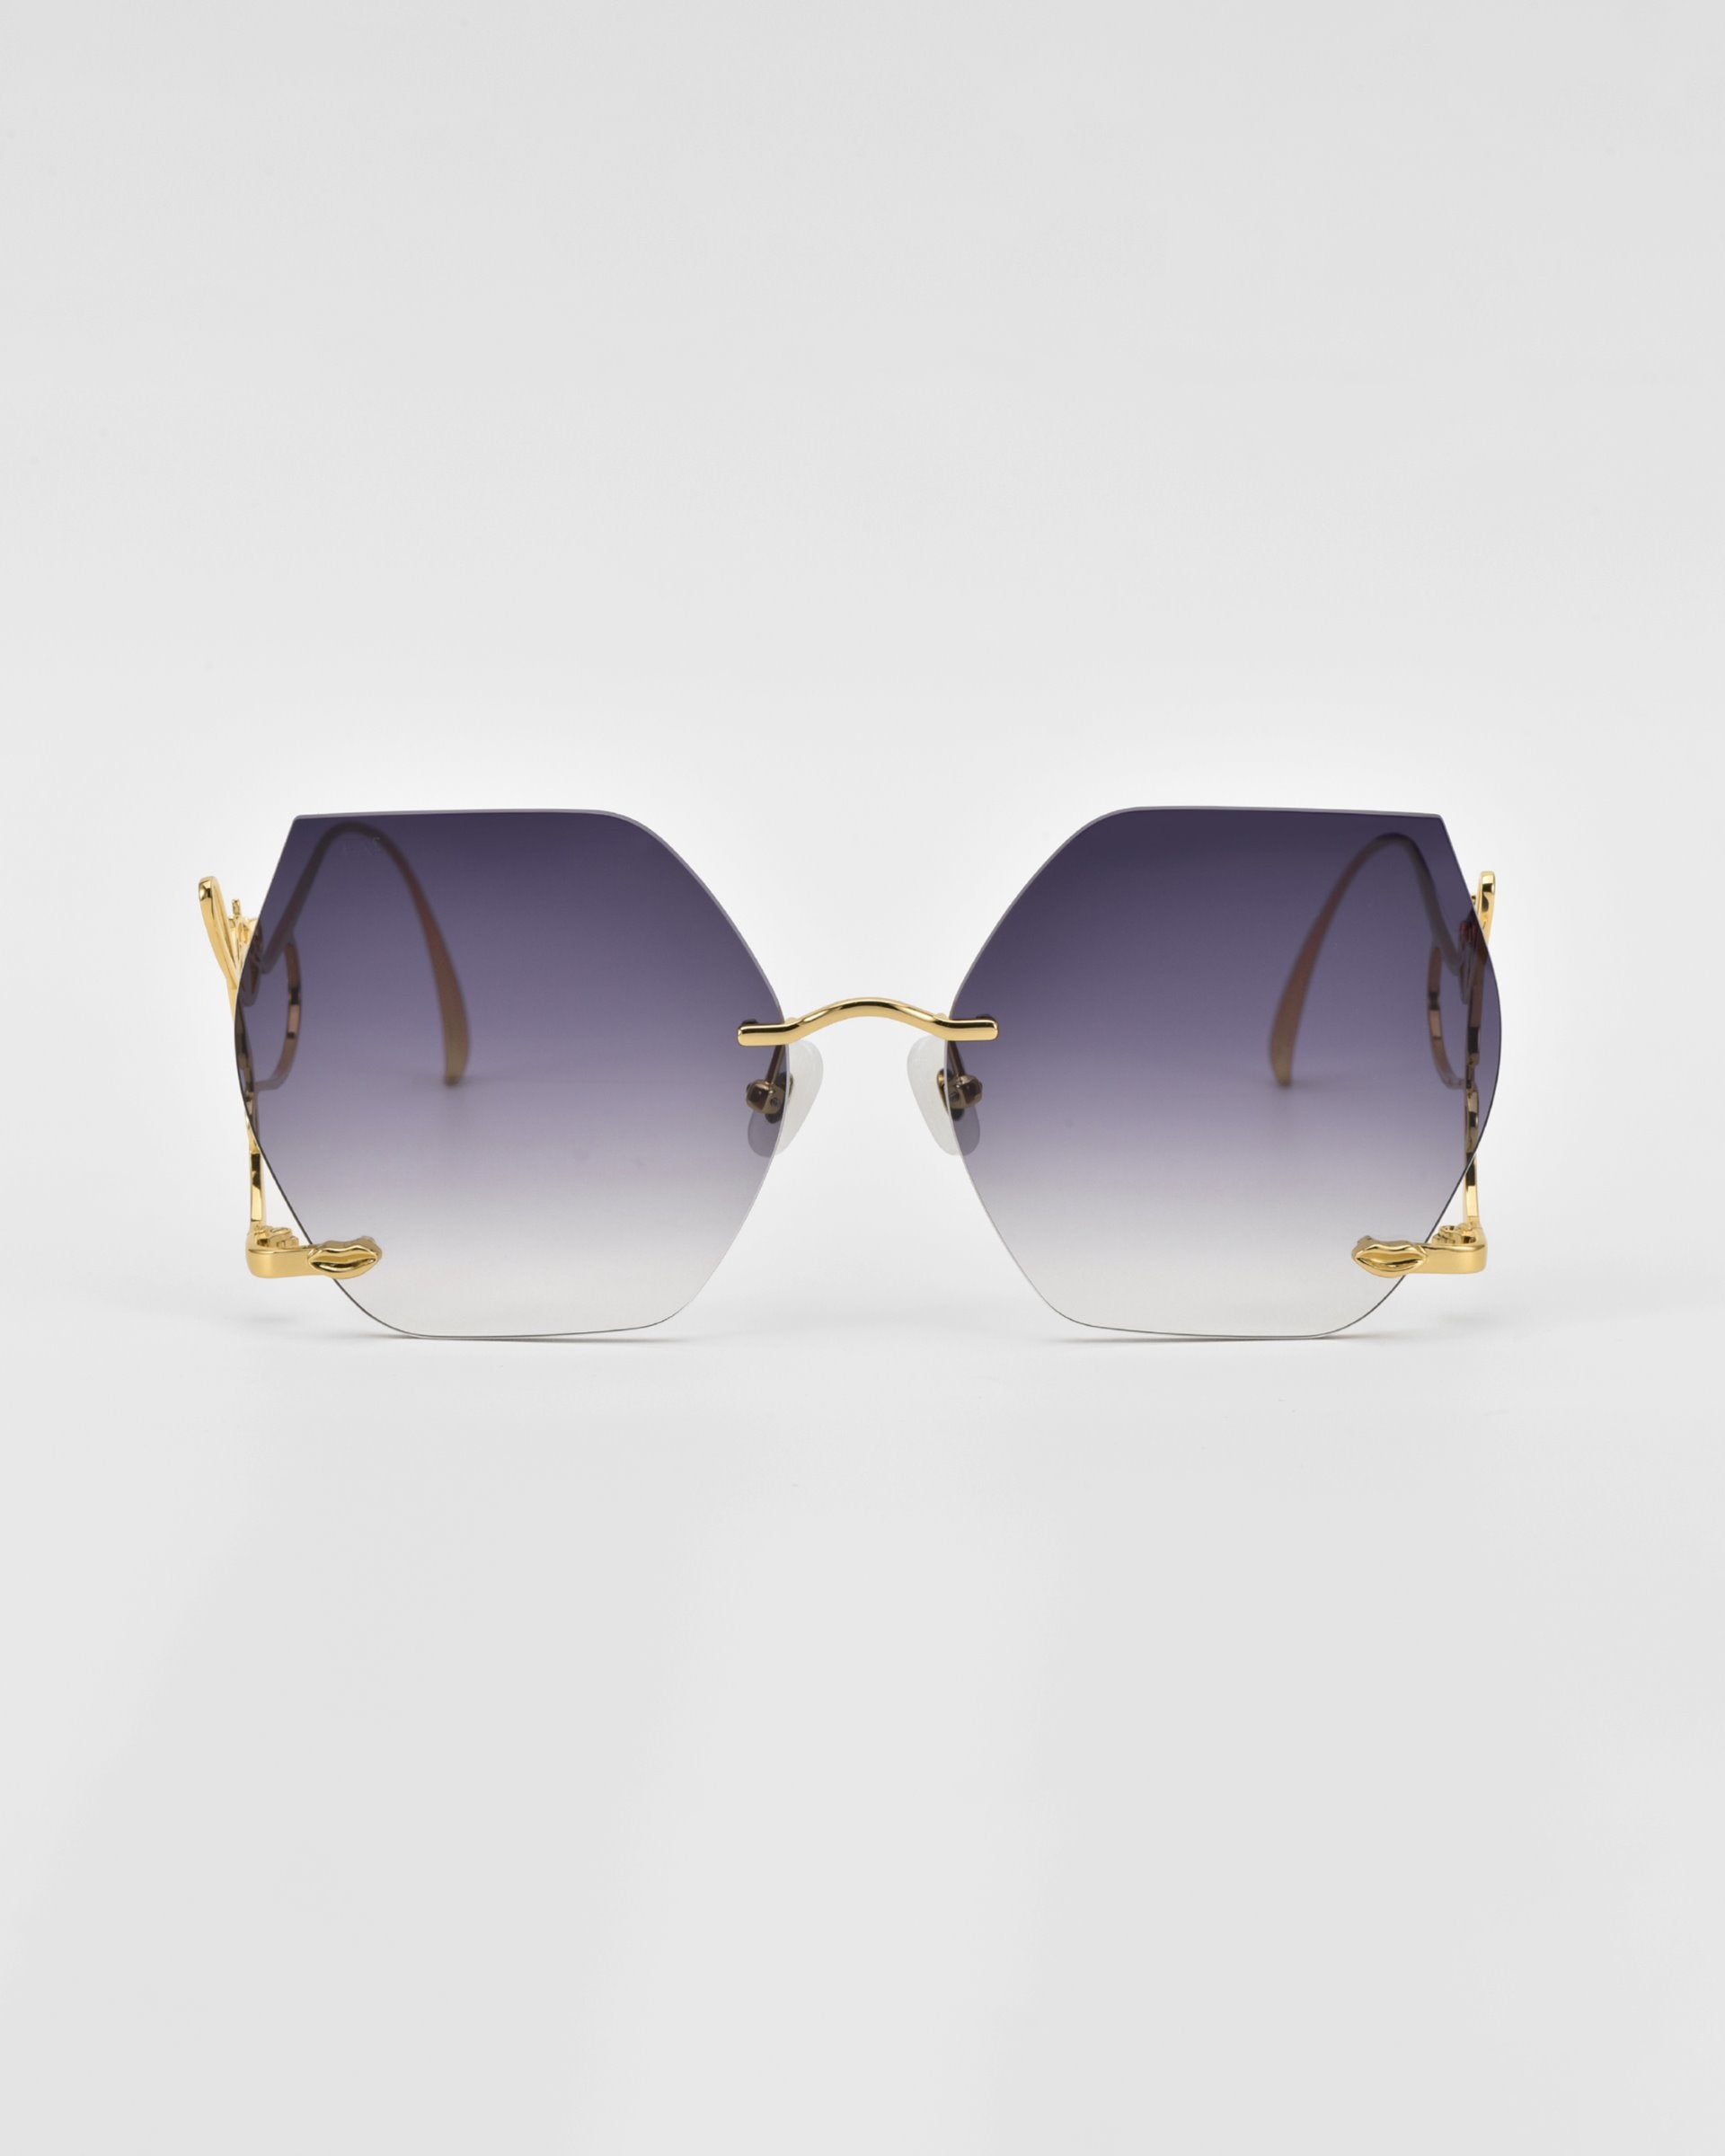 A pair of Cry Me a River sunglasses from For Art&#39;s Sake® with gradient hexagonal lenses, transitioning from dark purple to lighter shades at the bottom, featuring thin gold frames and temples, lying flat against a plain white background. These limited edition sunglasses are truly one-of-a-kind.